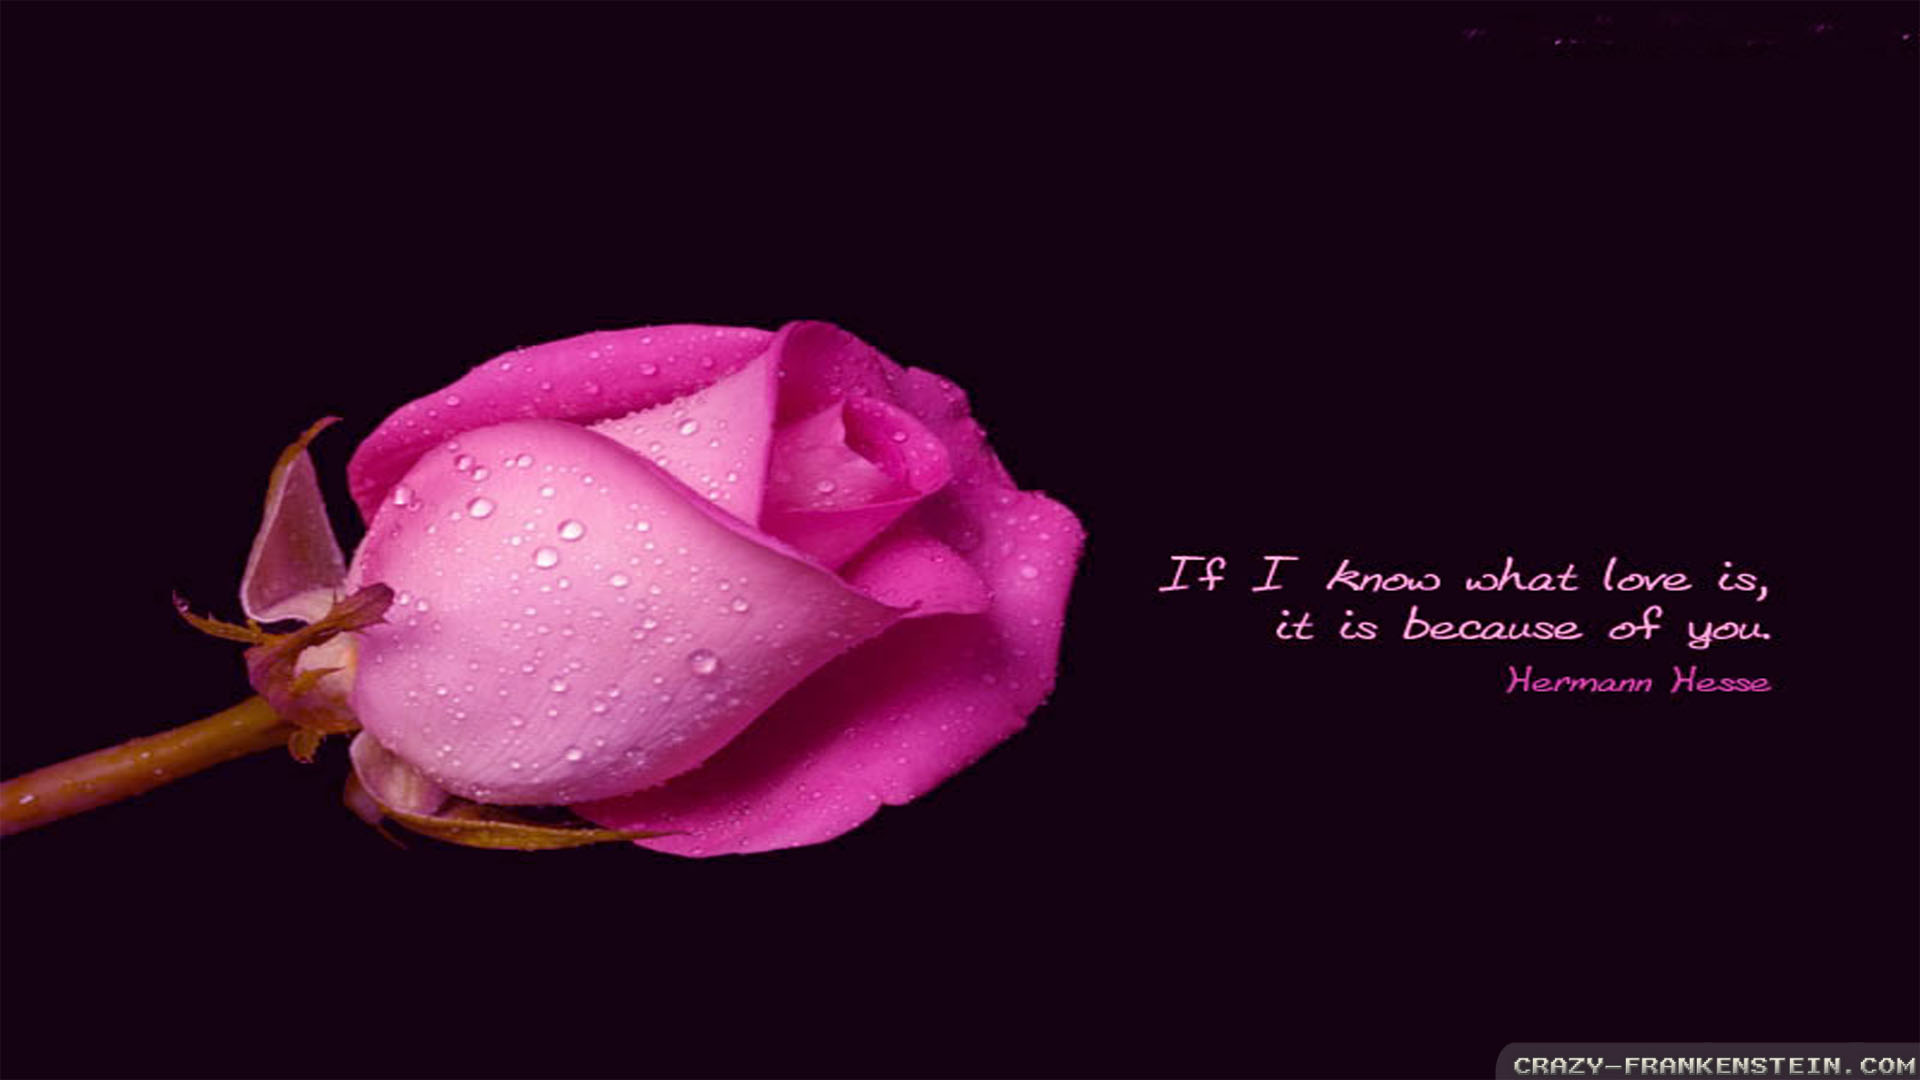 Romantic Quote About Flowers - HD Wallpaper 